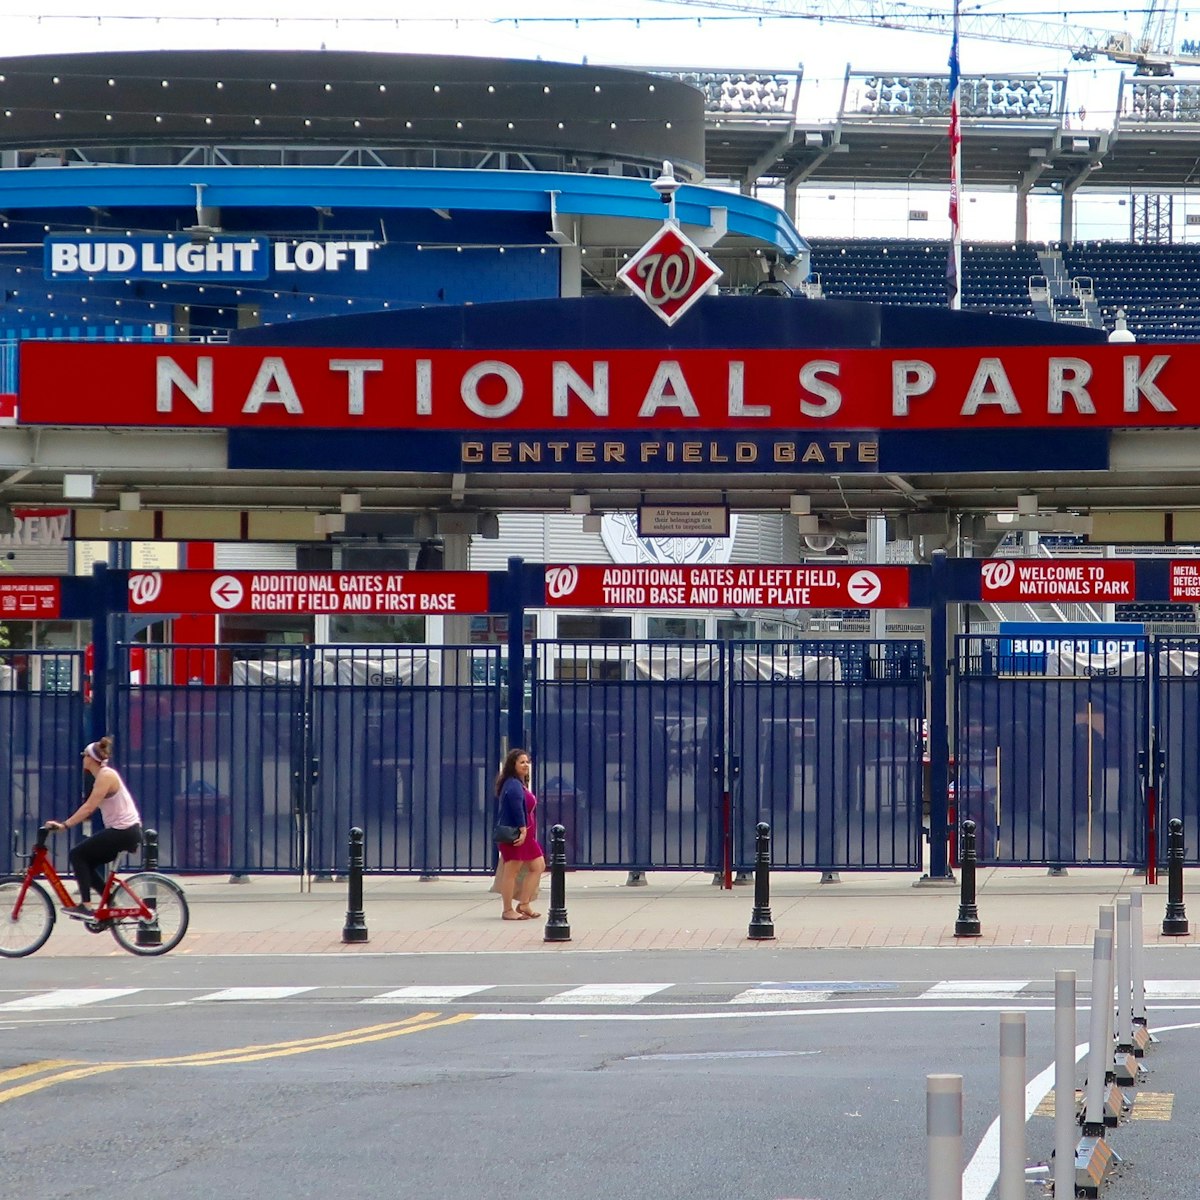 APRIL 21, 2019: Center field gate at the Nationals Park in Washington D.C.  
1376438810
baseball, editorial, entrance, event, field gate, nationals park, nats, professional, washington dc